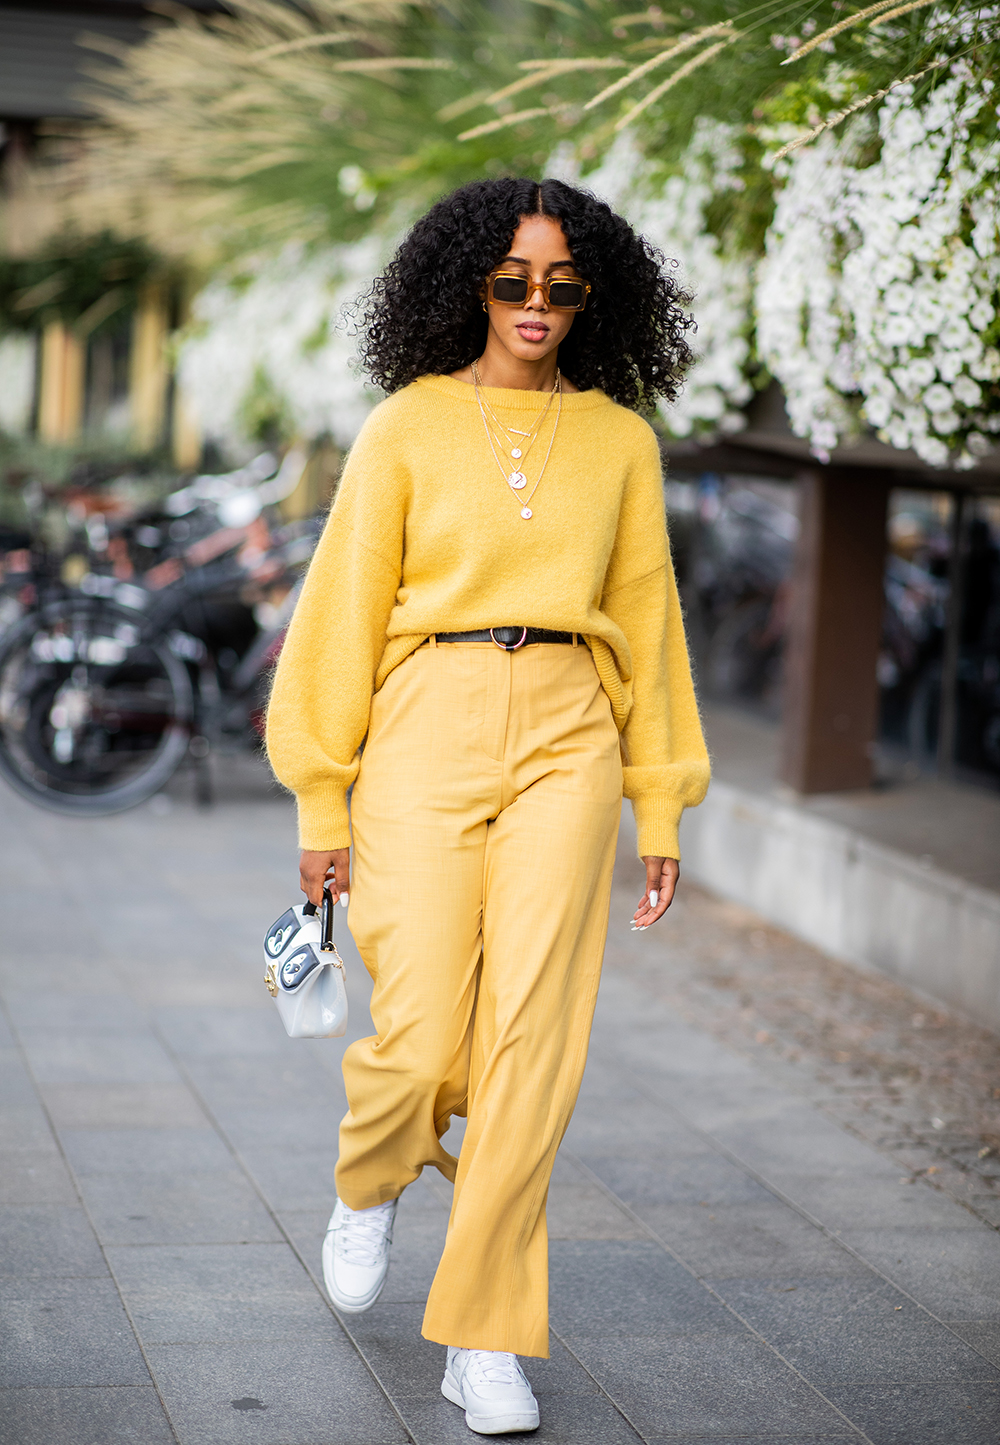 STOCKHOLM, SWEDEN - AUGUST 29: A guest wearing yellow knit and yellow pants, bag is seen during Stockholm Runway SS19 on August 29, 2018 in Stockholm, Sweden. (Photo by Christian Vierig/Getty Images)